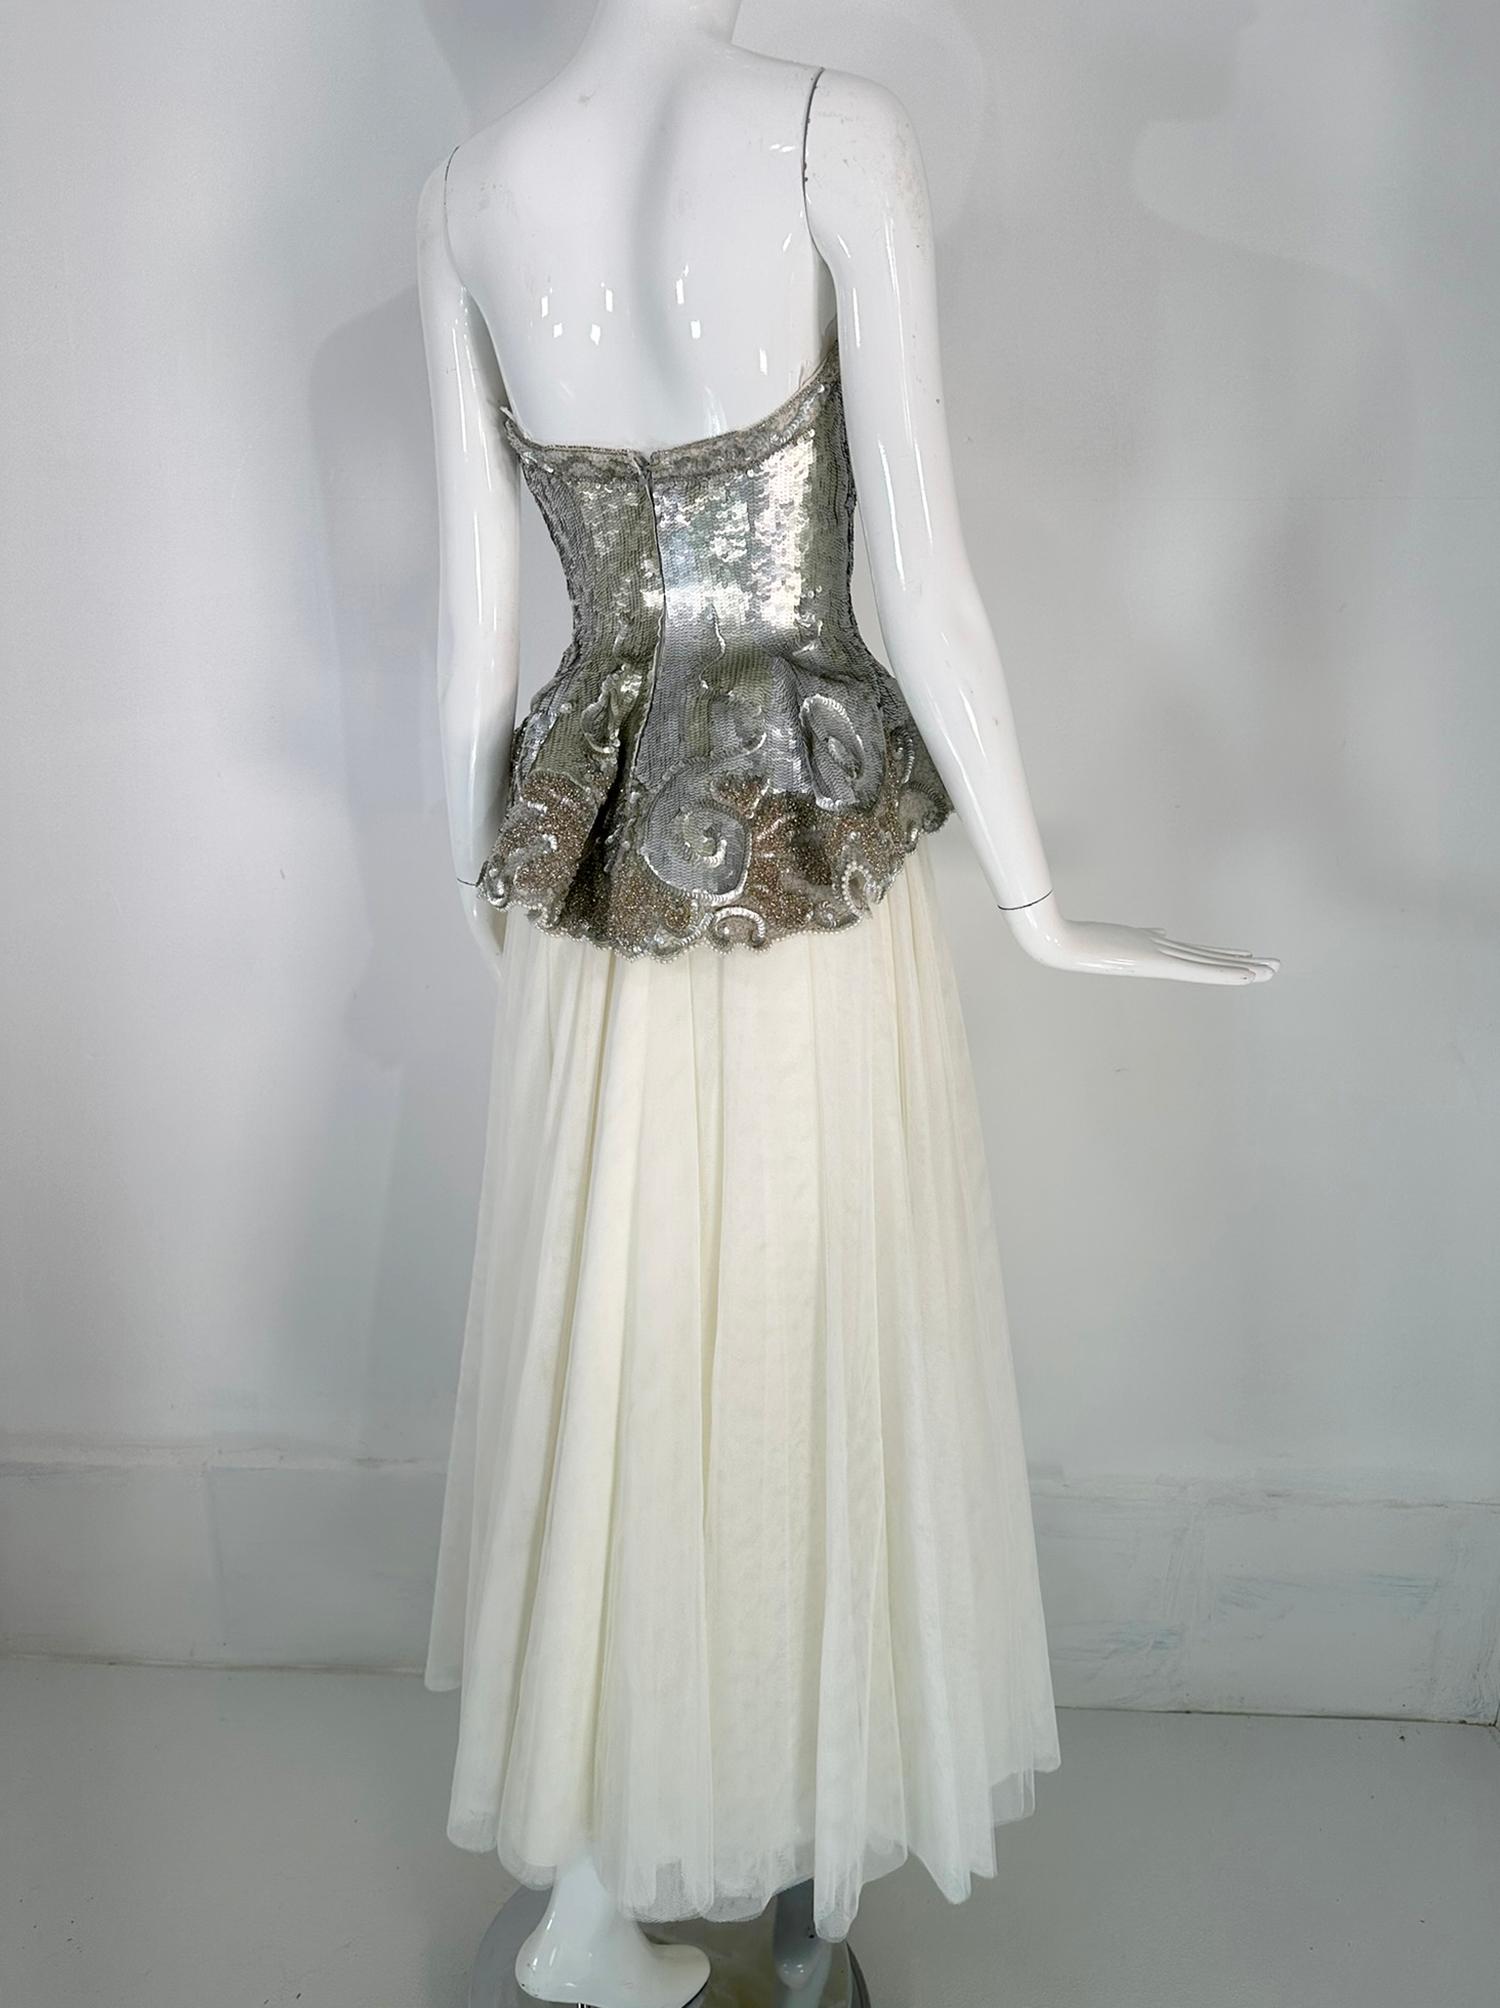 Fabrice Gold & Silver Sequin Peplum Hem Bustier with White Tulle Layered Skirt 3